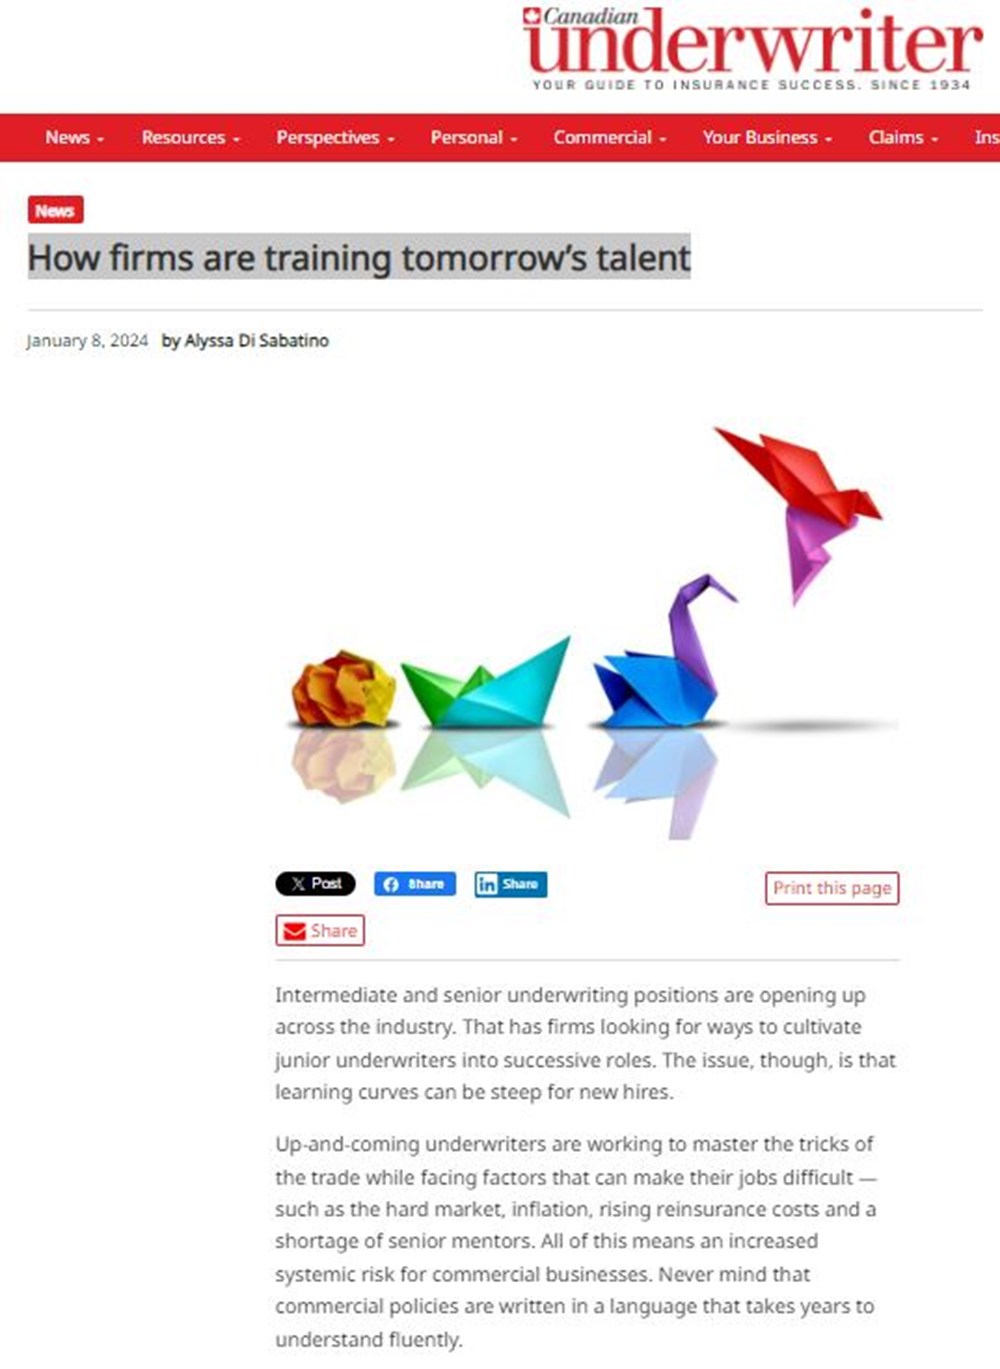 A screenshot of the article "How firms are training tomorrow's talent"